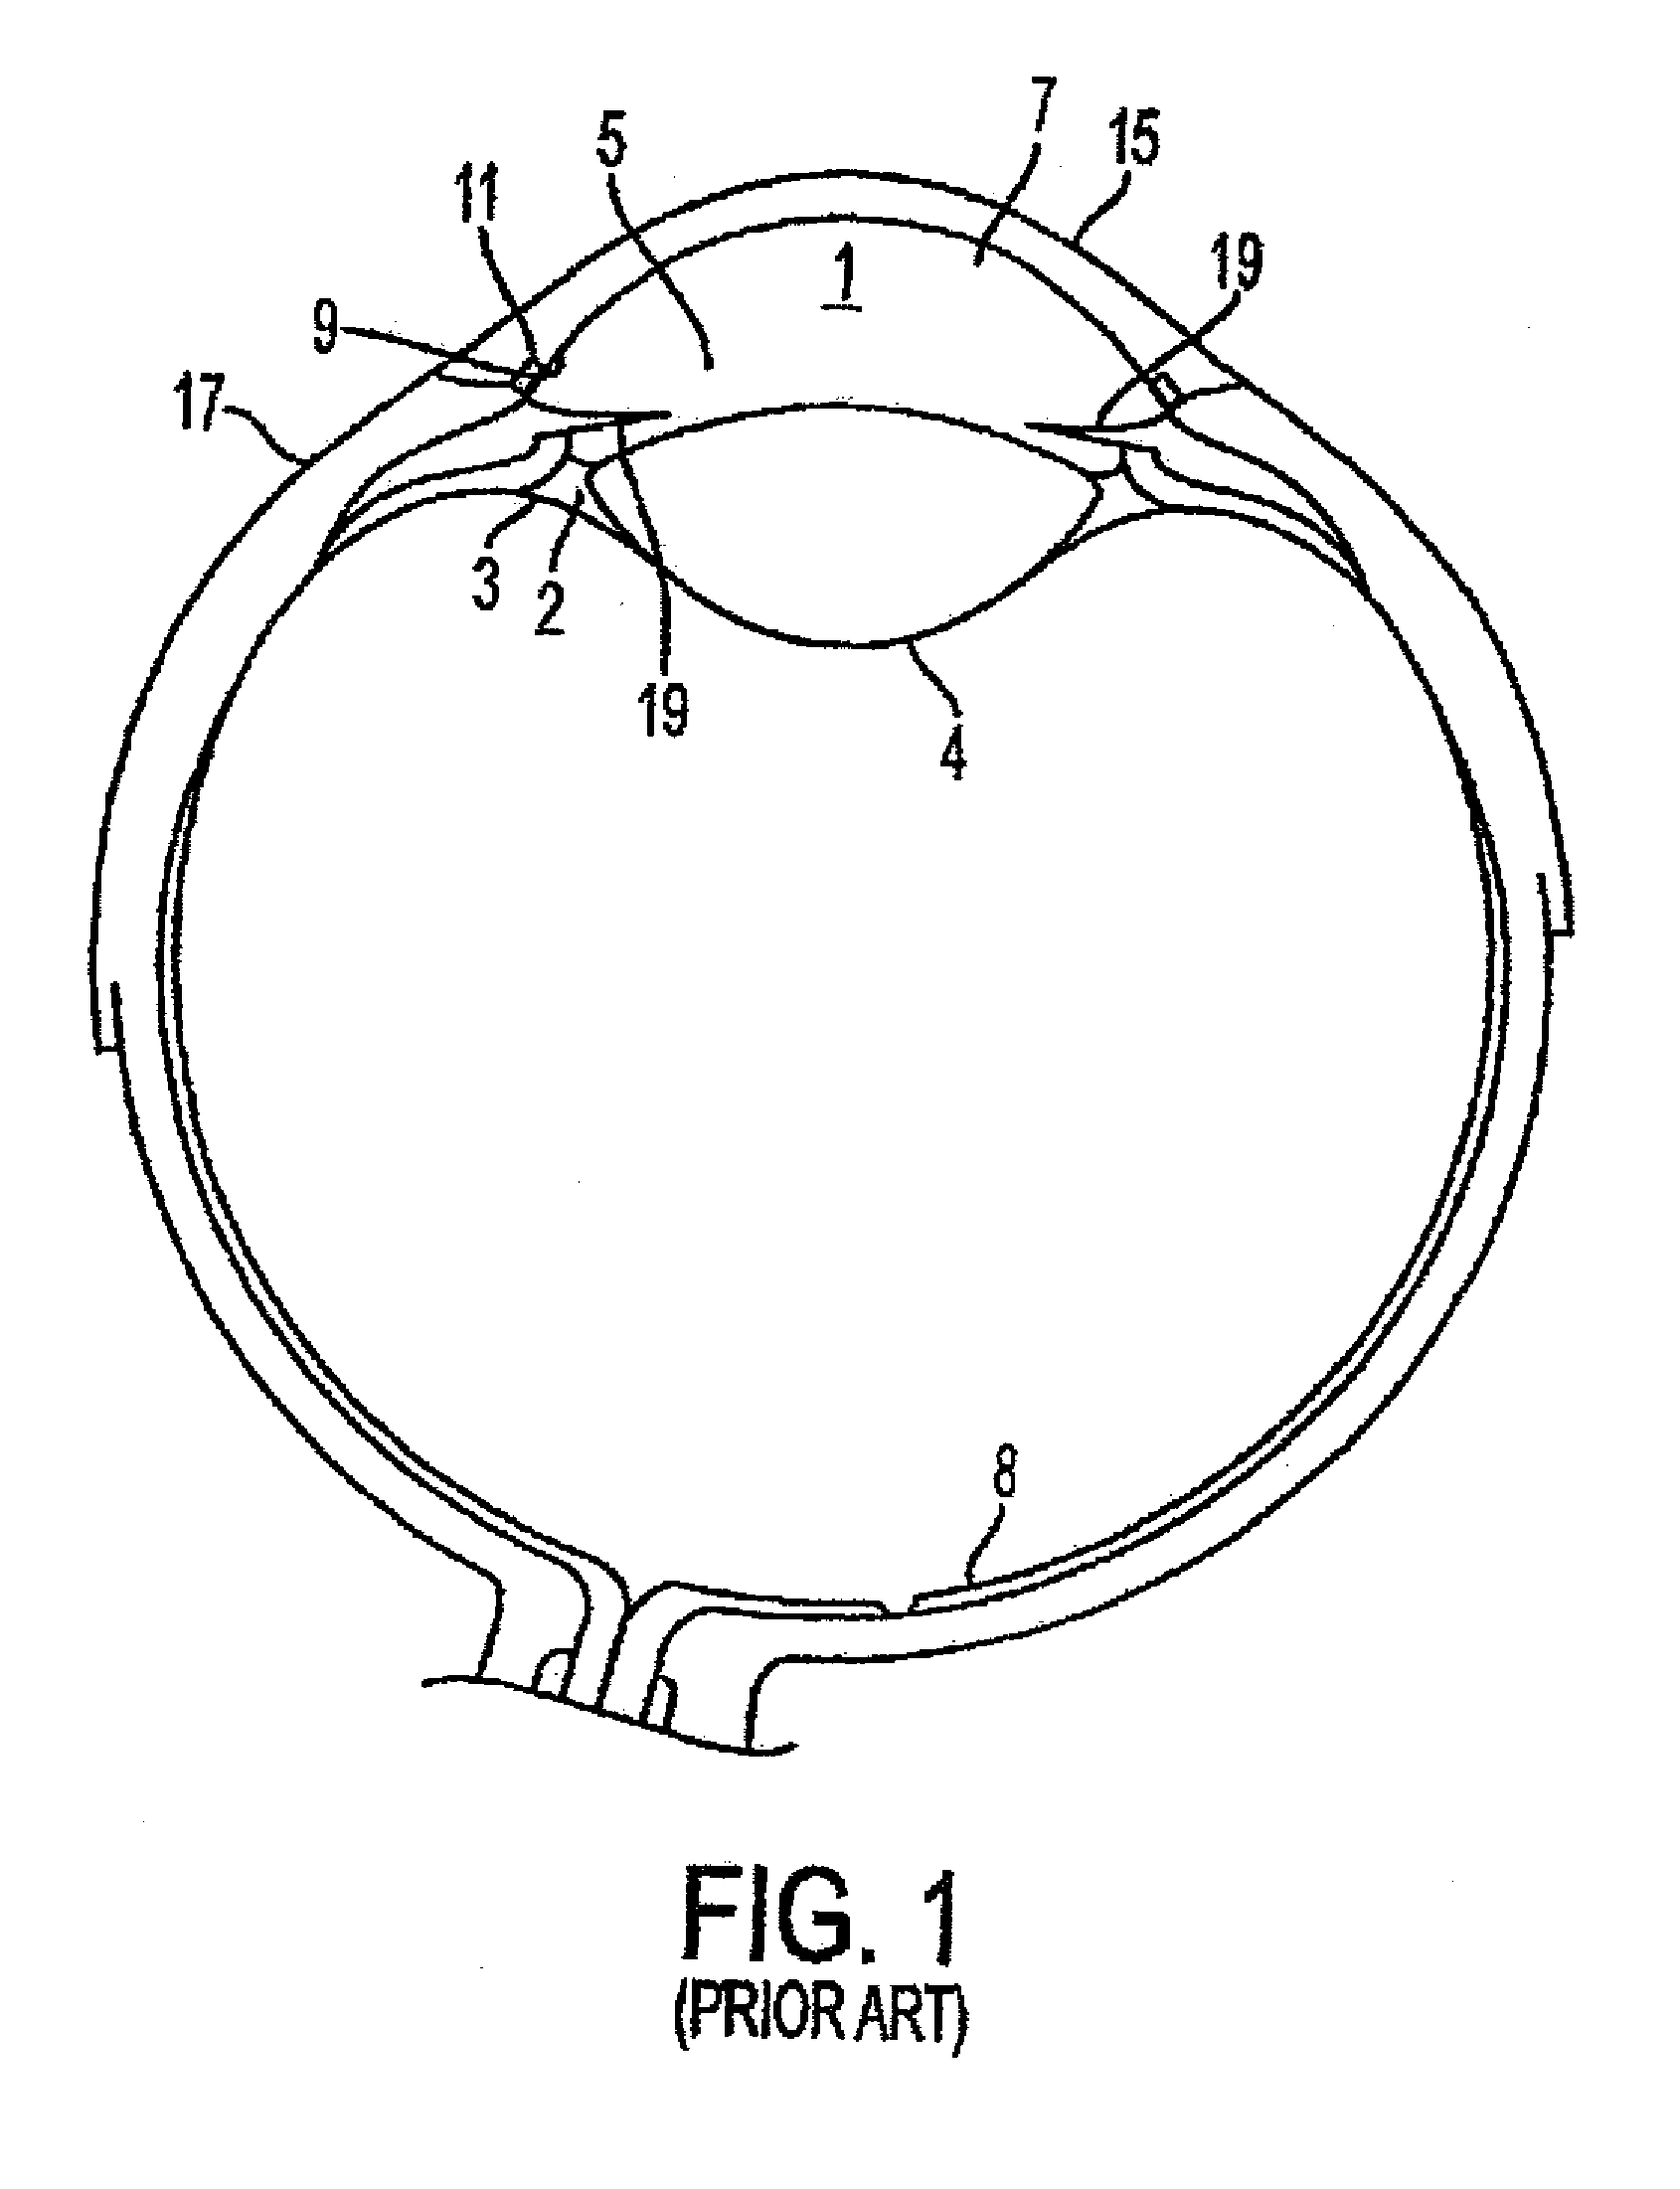 Methods and apparatuses for the treatment of glaucoma using visible and infrared ultrashort laser pulses